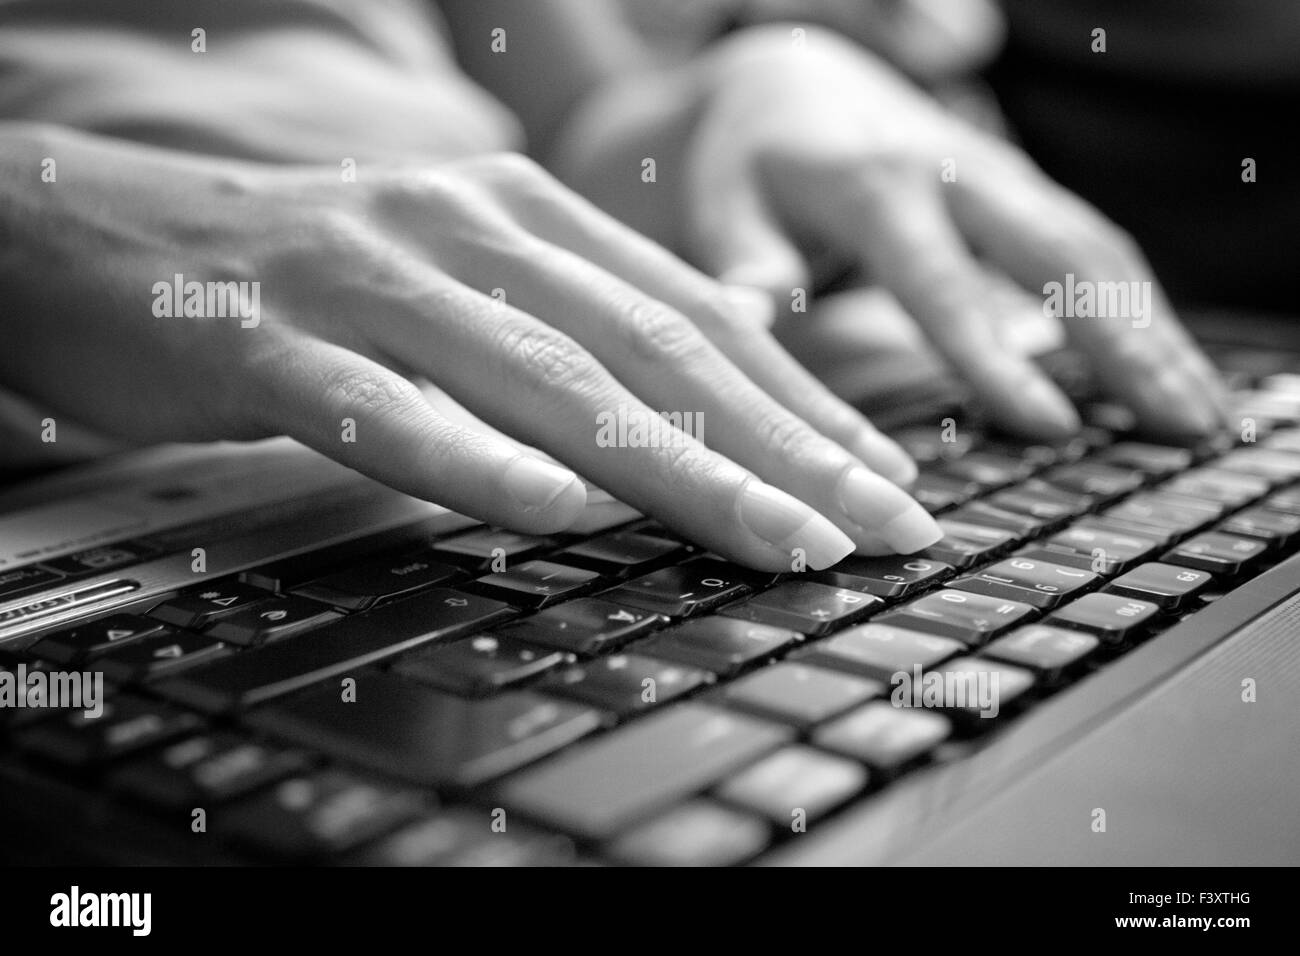 hands working on a keyboard black white Stock Photo